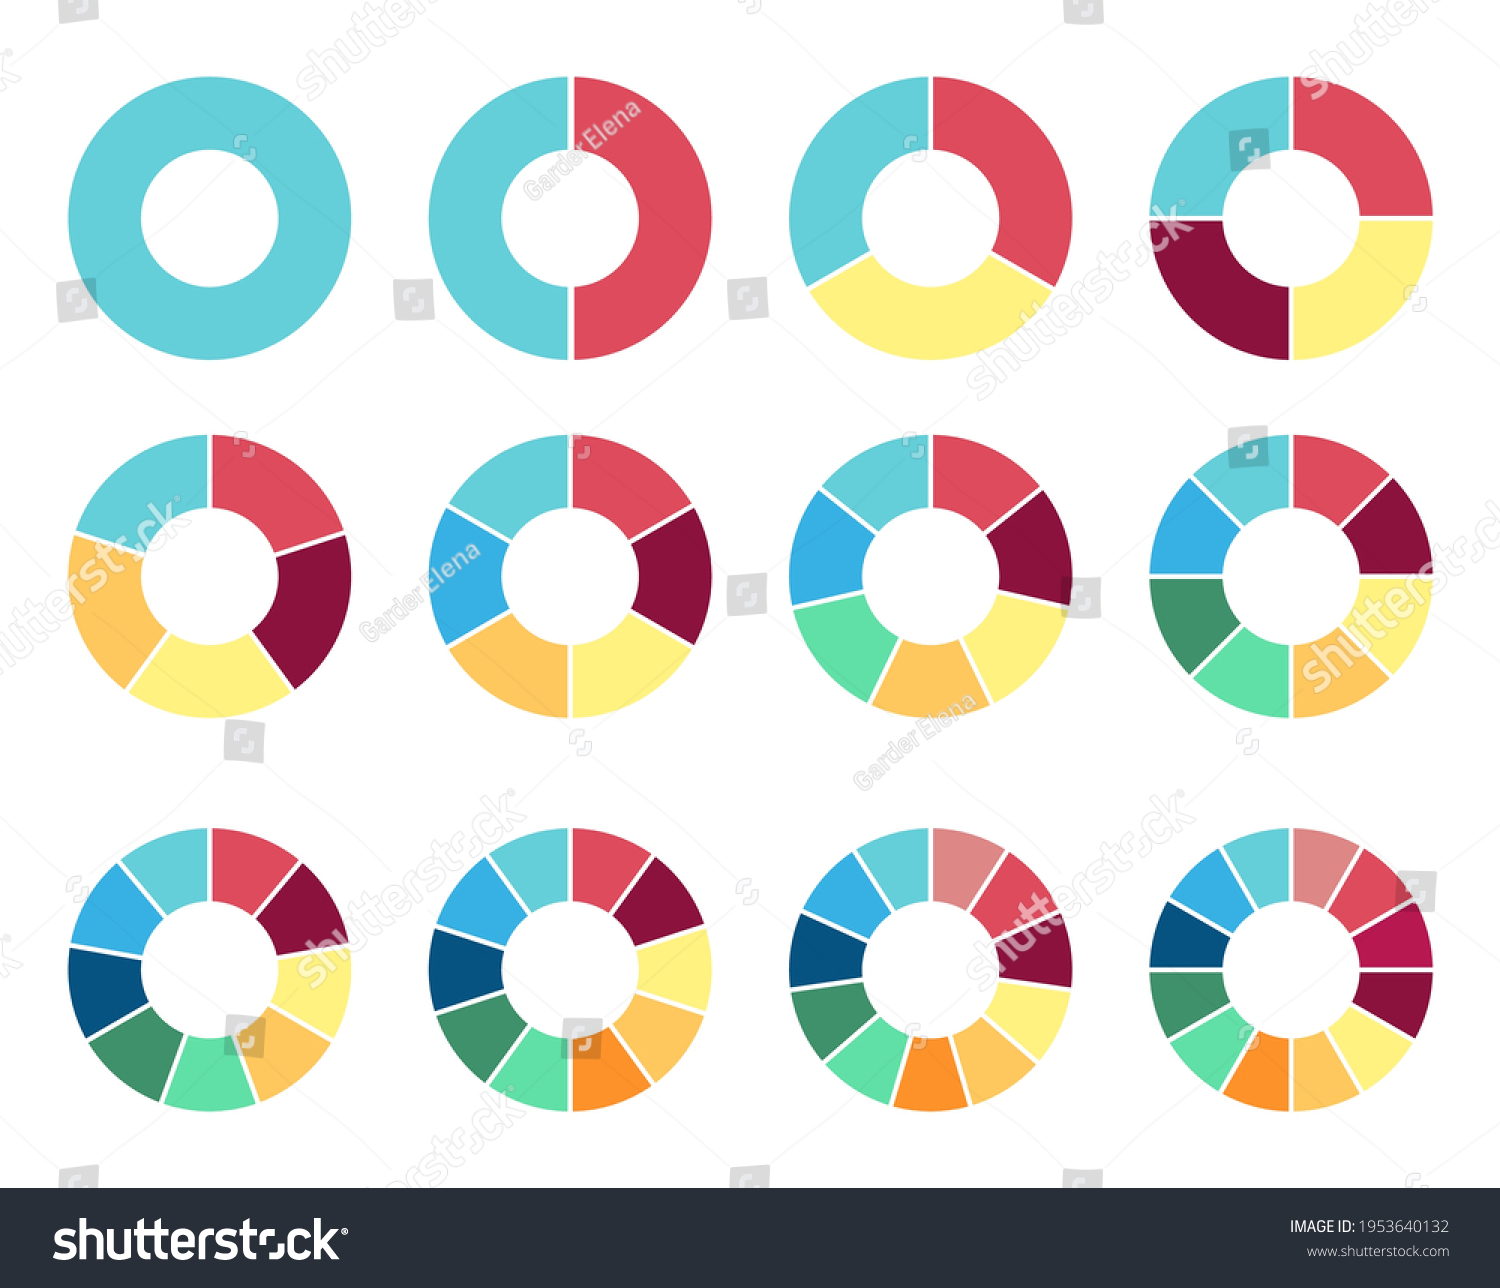 Circle Pie Chart 2345678910 11 12 Stock Vector Royalty Free 1953640132 Shutterstock 0450